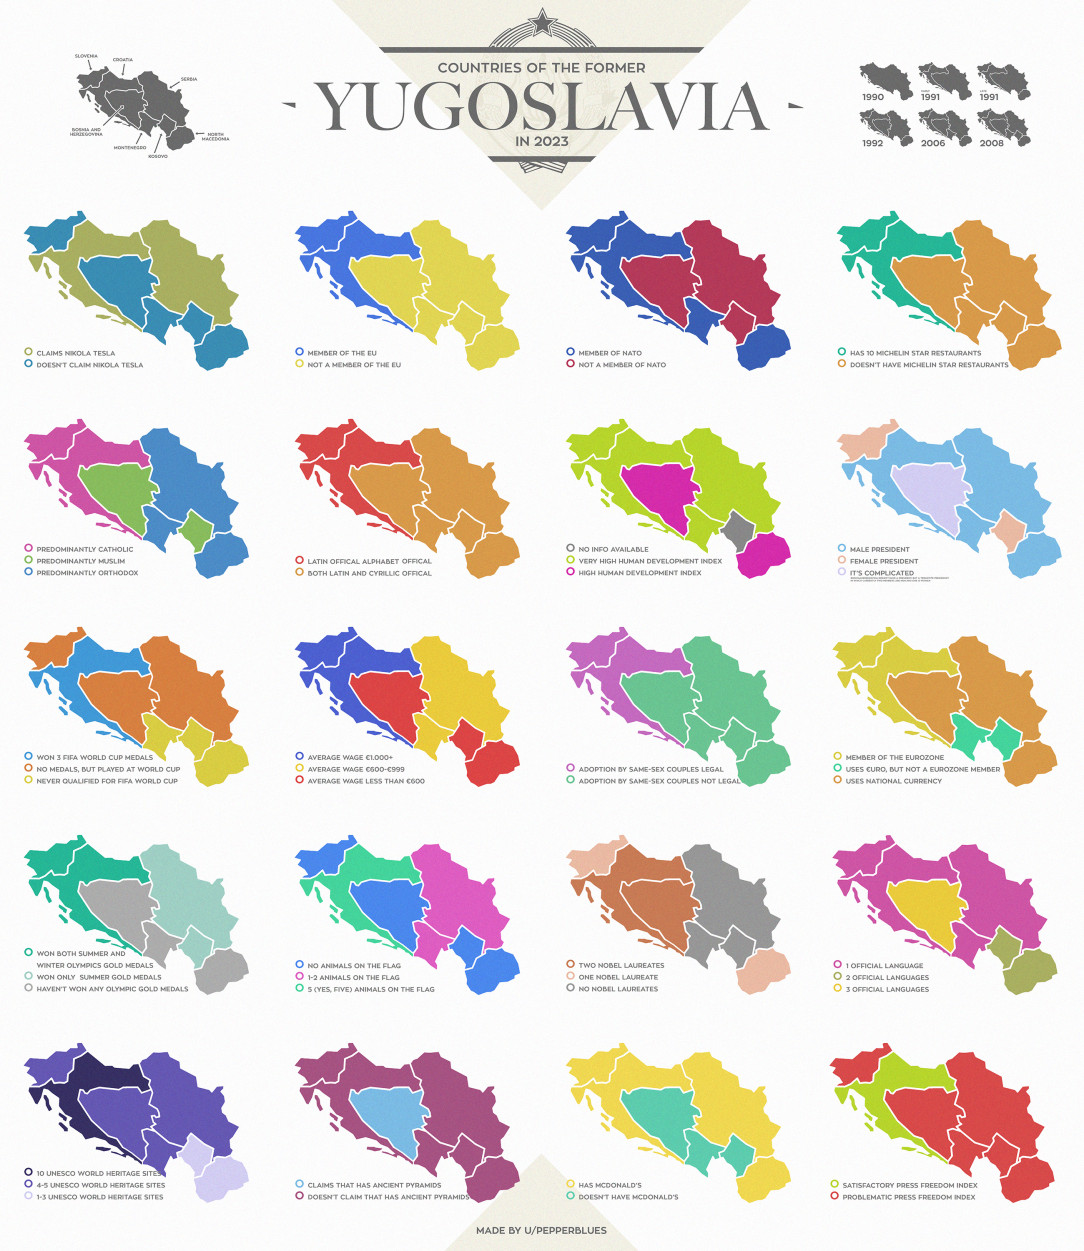 Countries of the former Yugoslavia in 2023, similarities and differences